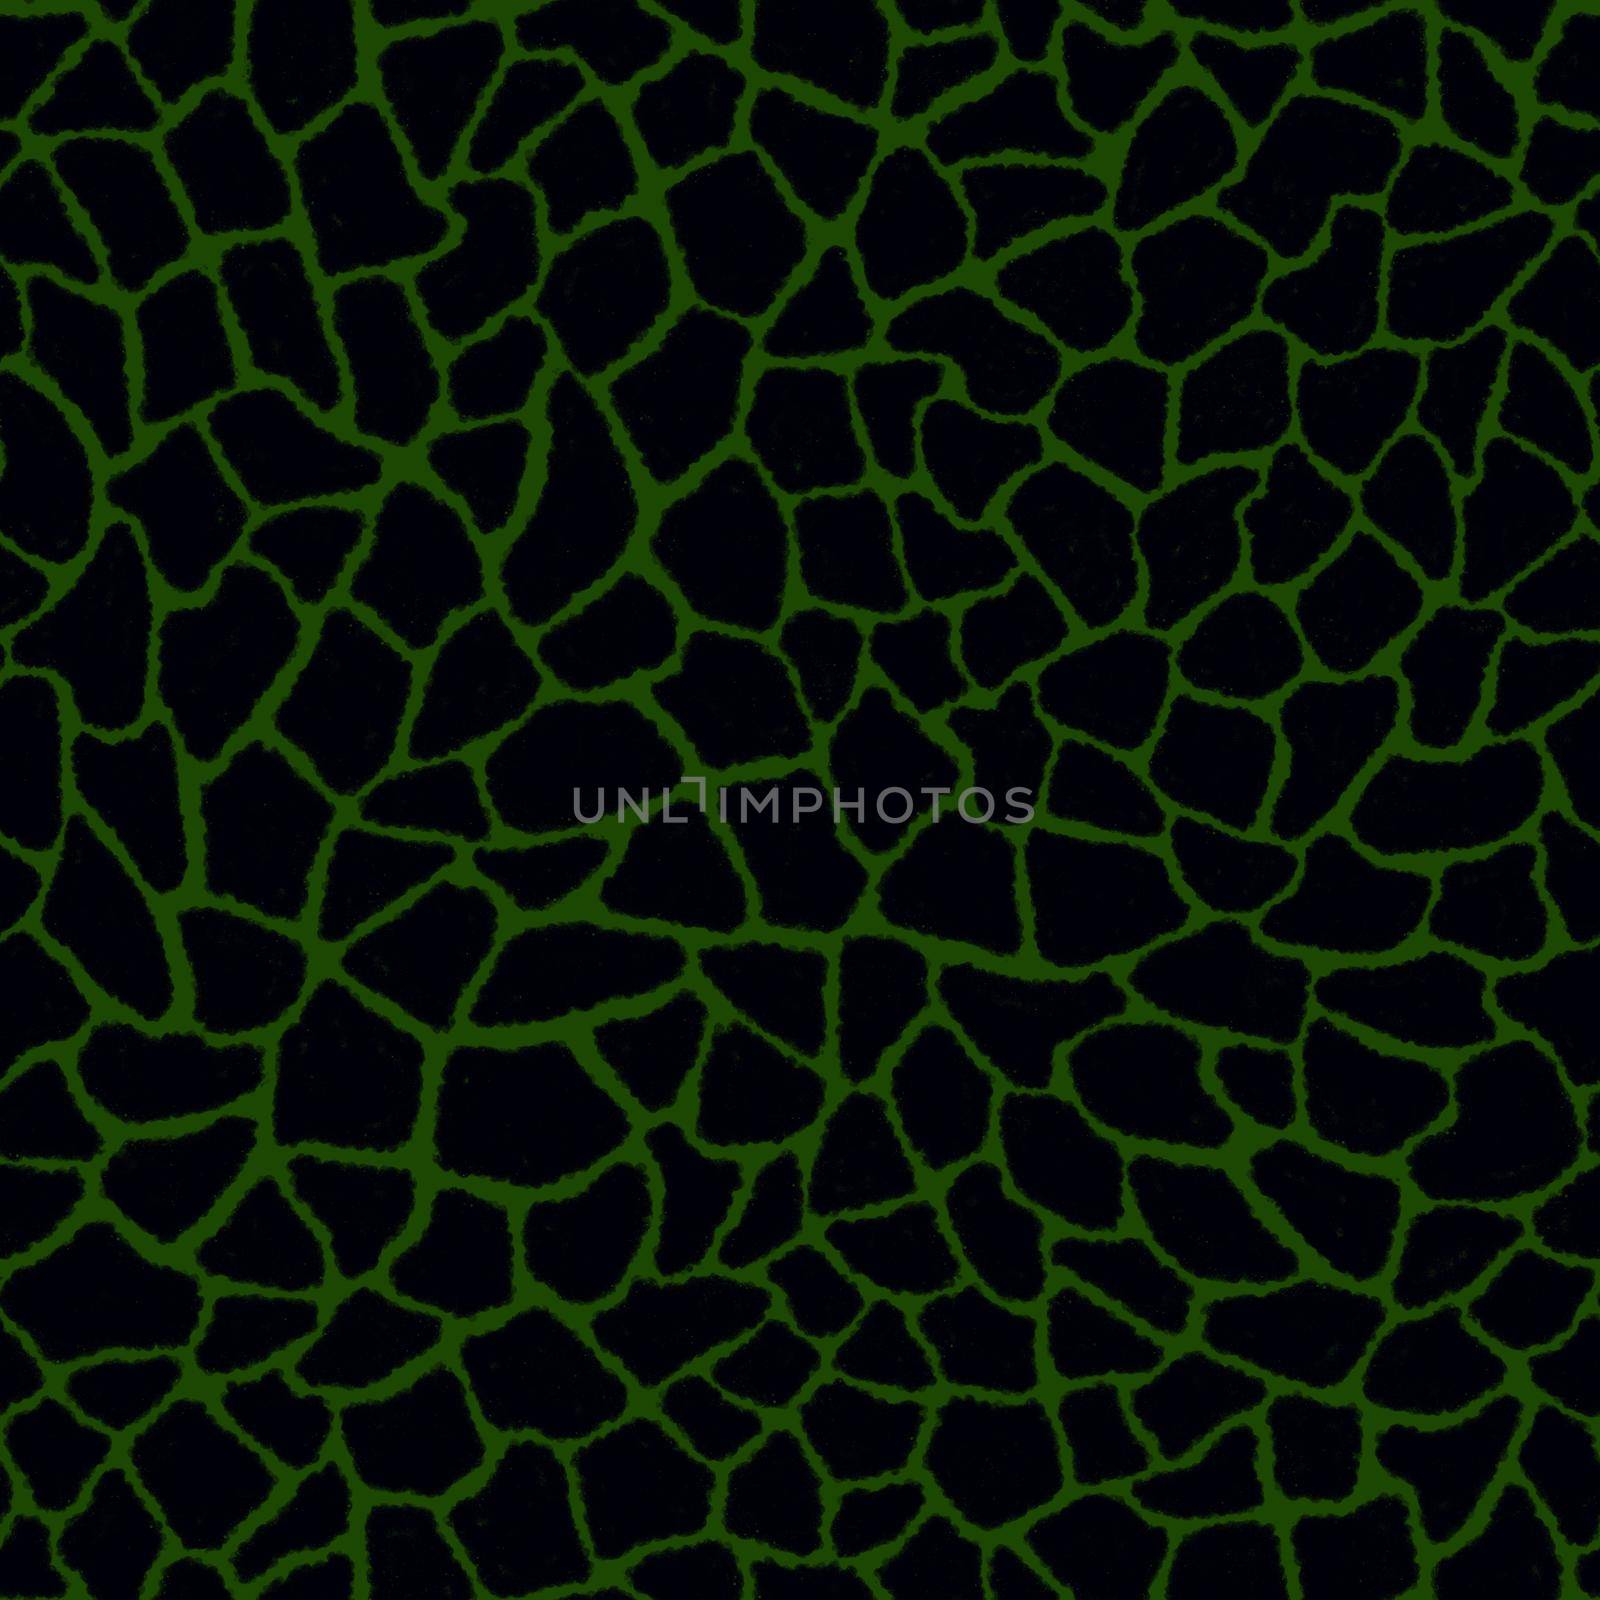 Giraffe skin color seamless pattern with fashion animal print for continuous replicate. Chaotic mosaic black pieces on green background. Wrapping paper, funny textile fabric print,design,decor by Angelsmoon